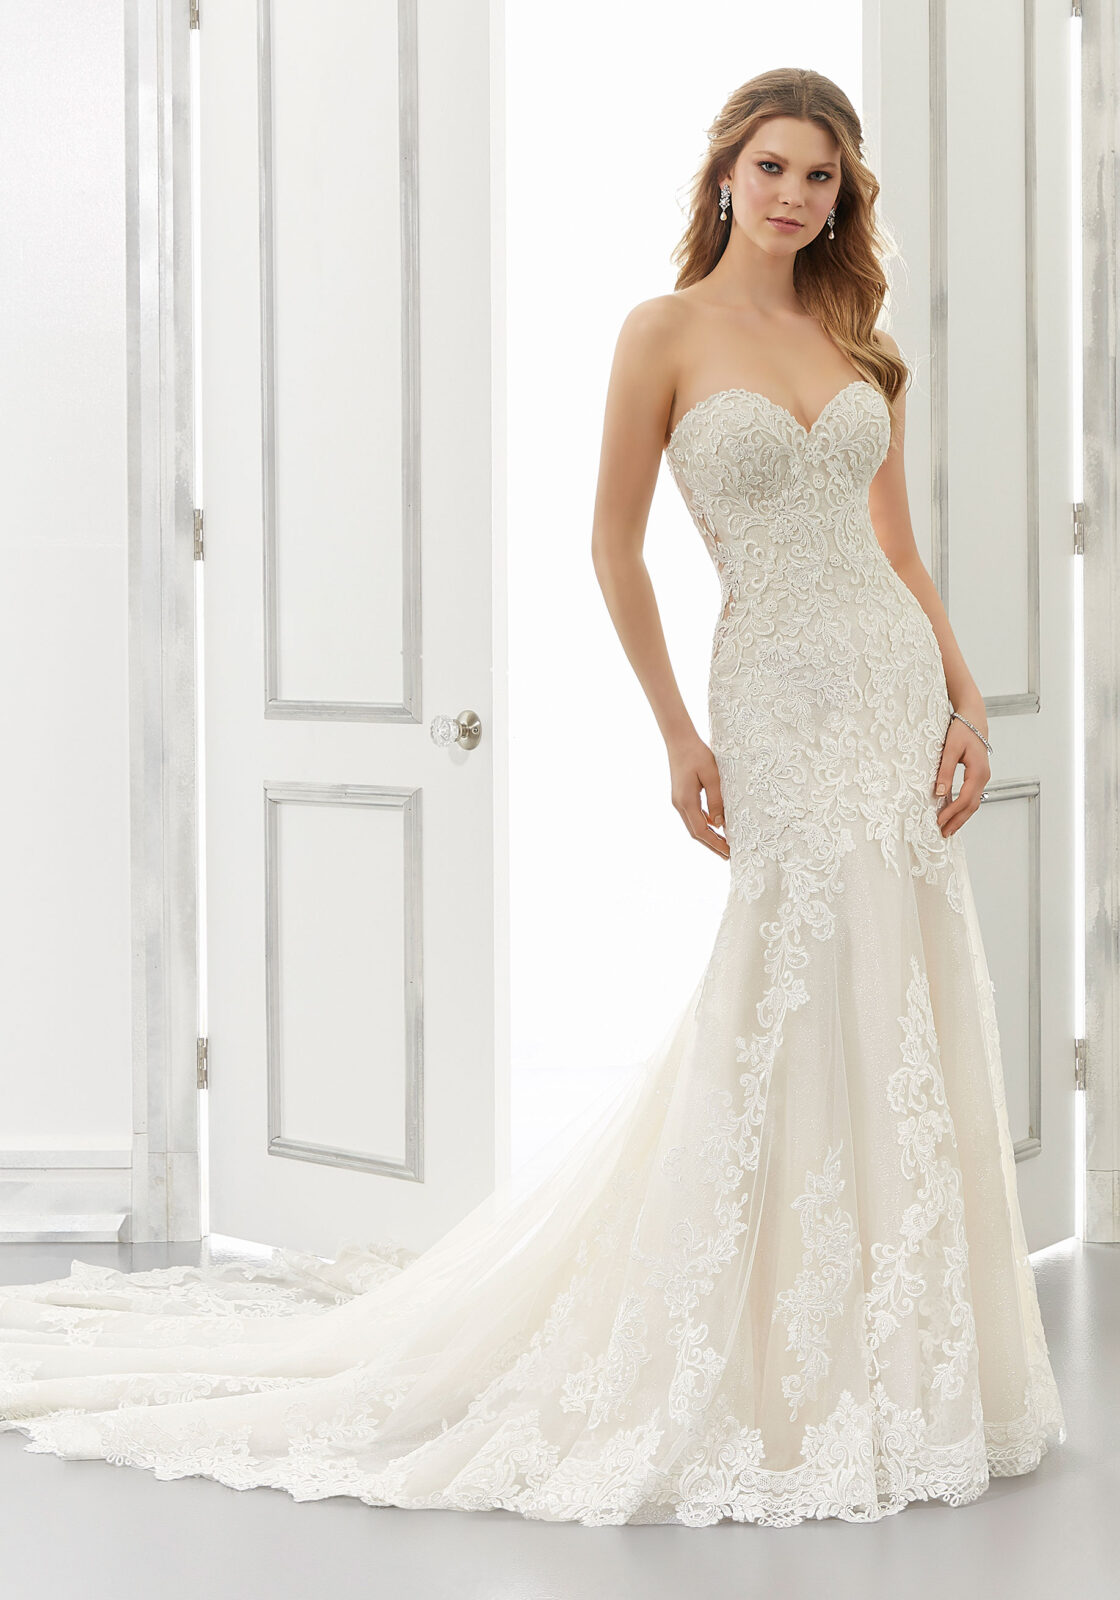 Amazing Wedding Dress Gallery  Don t miss out 